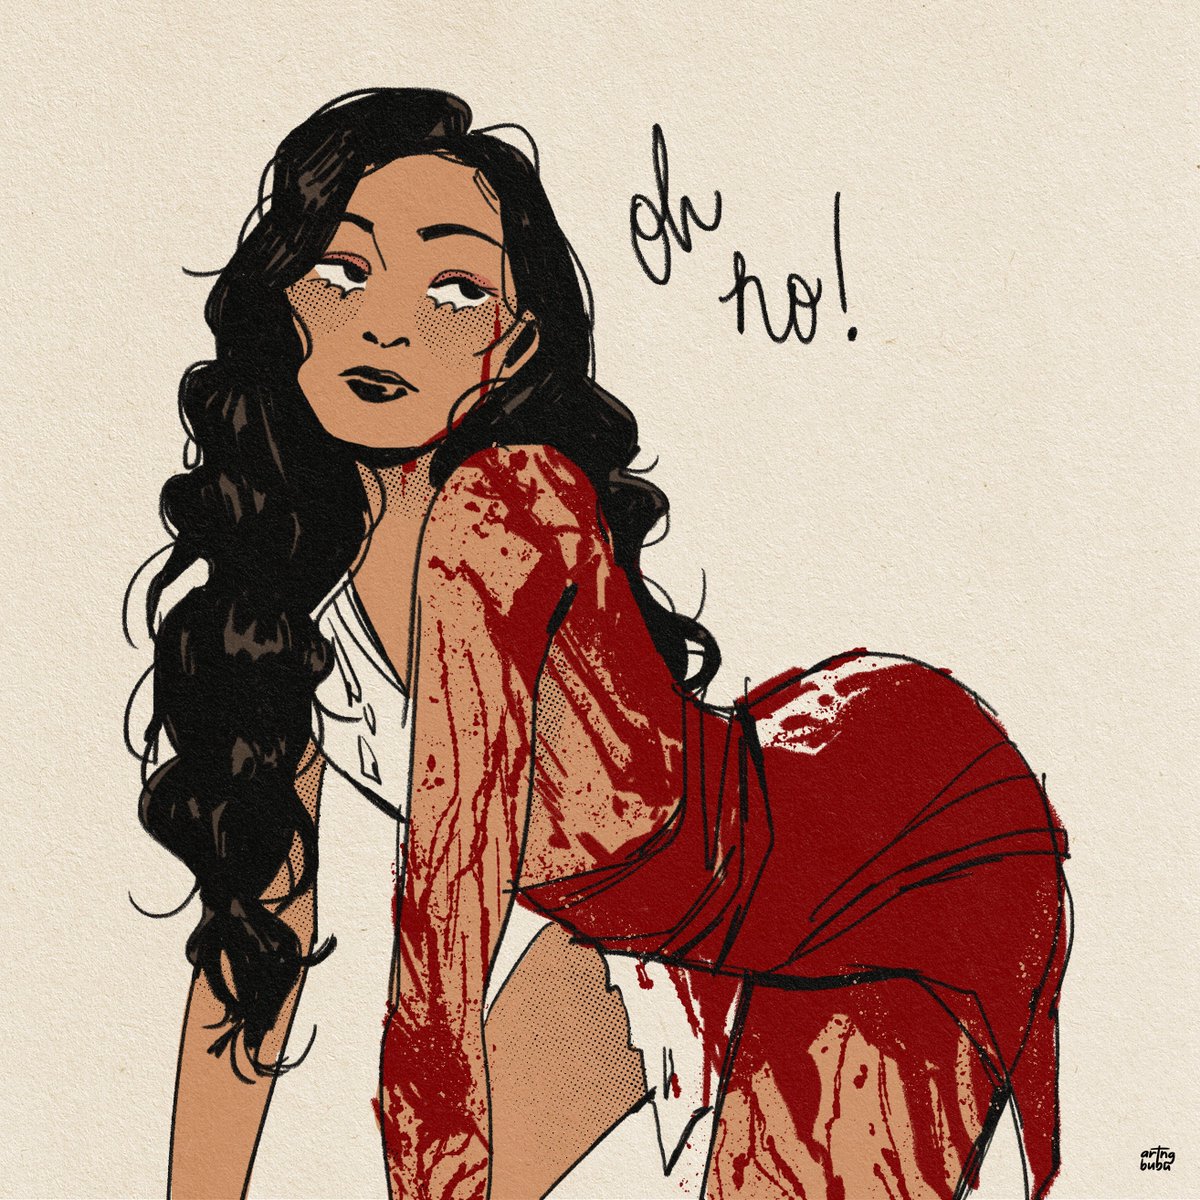 show how you draw/paint women ! they're in quite a Situation https://t.co/B92WVMdTMv 